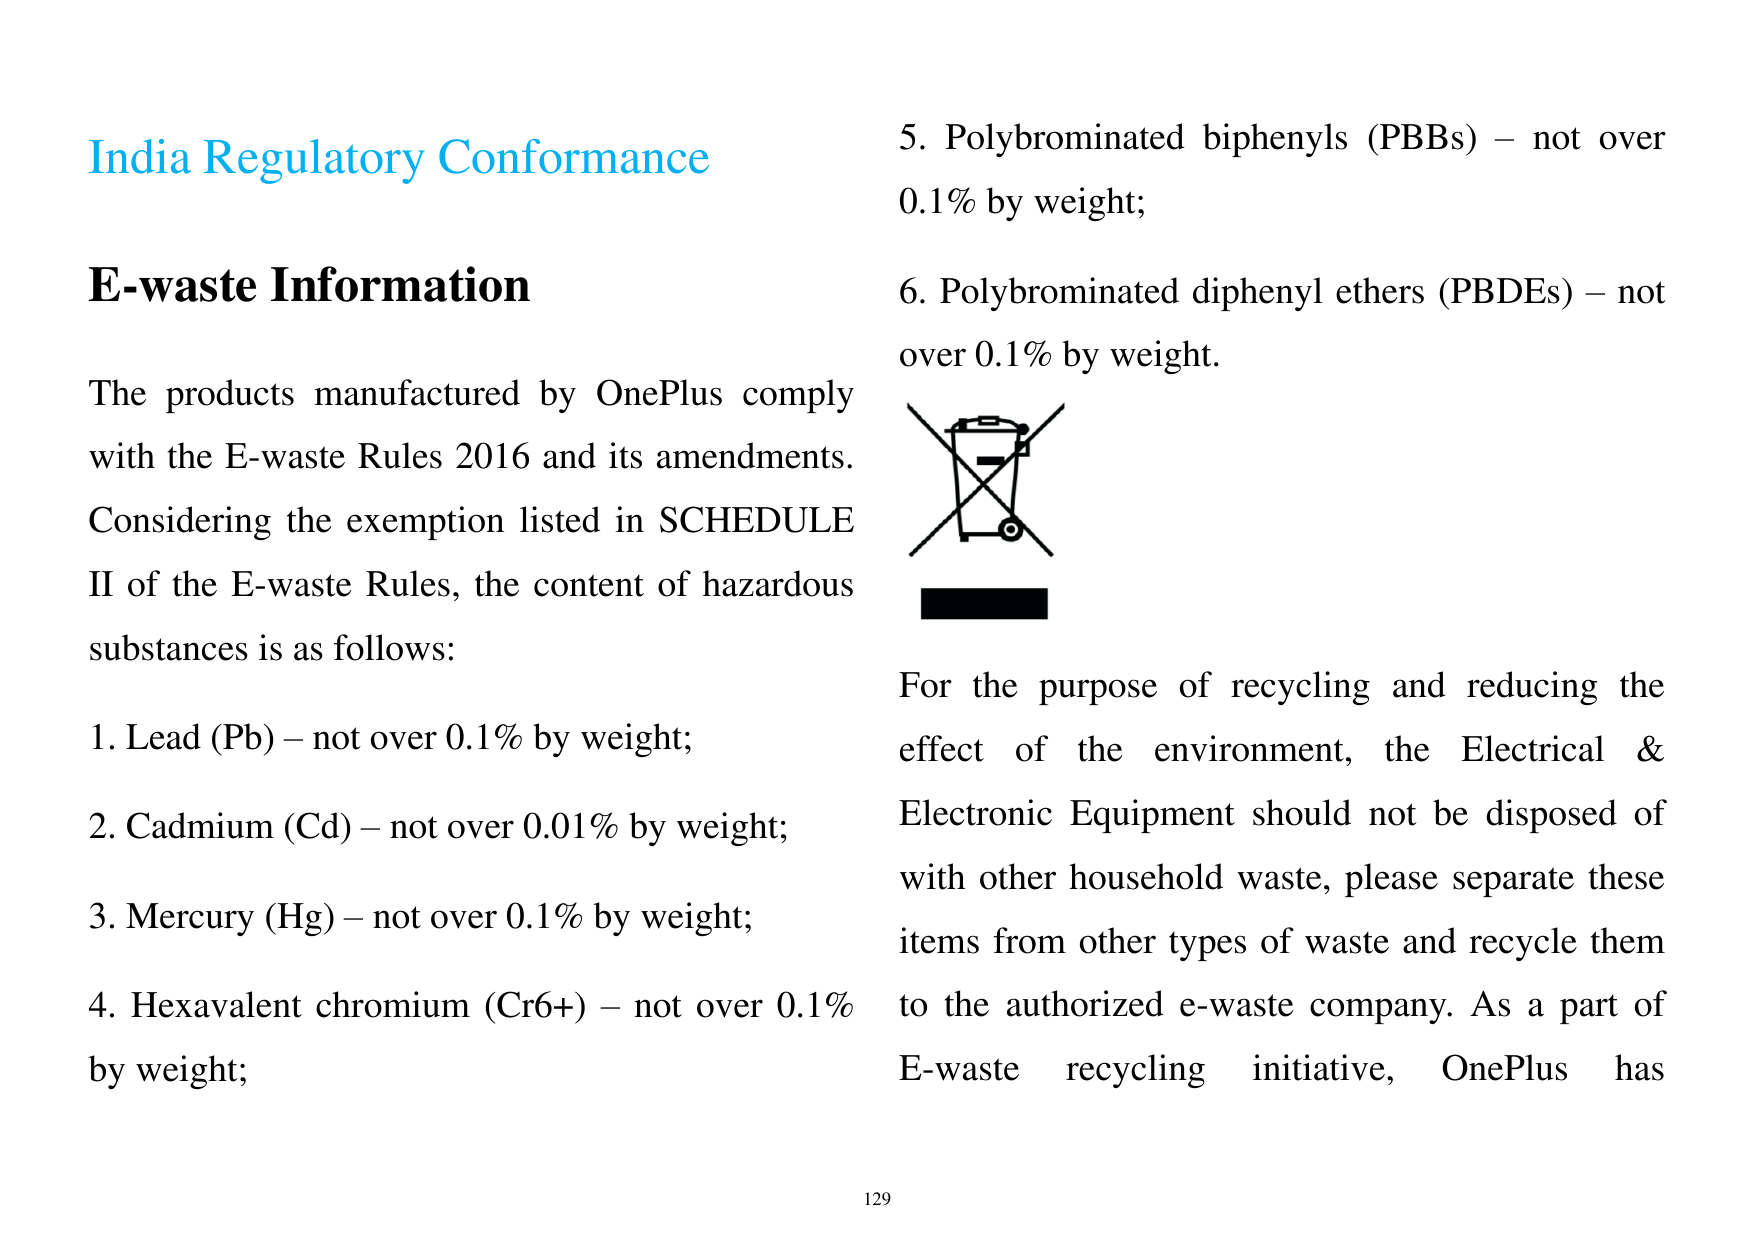 5. Polybrominated biphenyls (PBBs) – not overIndia Regulatory Conformance0.1% by weight;E-waste Information6. Polybrominated dip